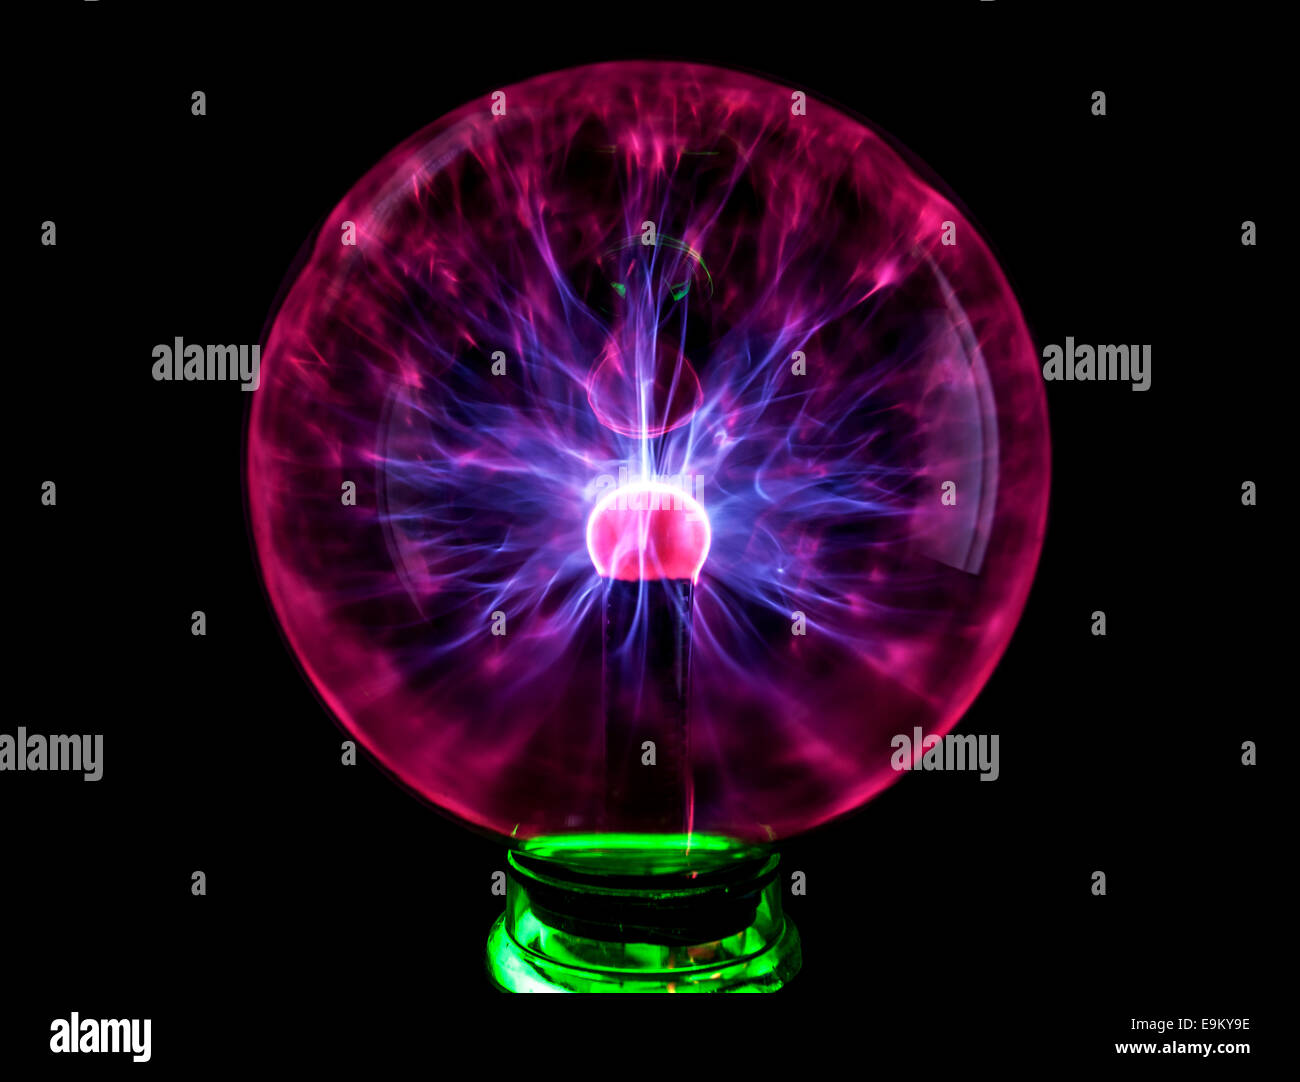 Plasma ball with colorful blots, abstract background. Stock Photo